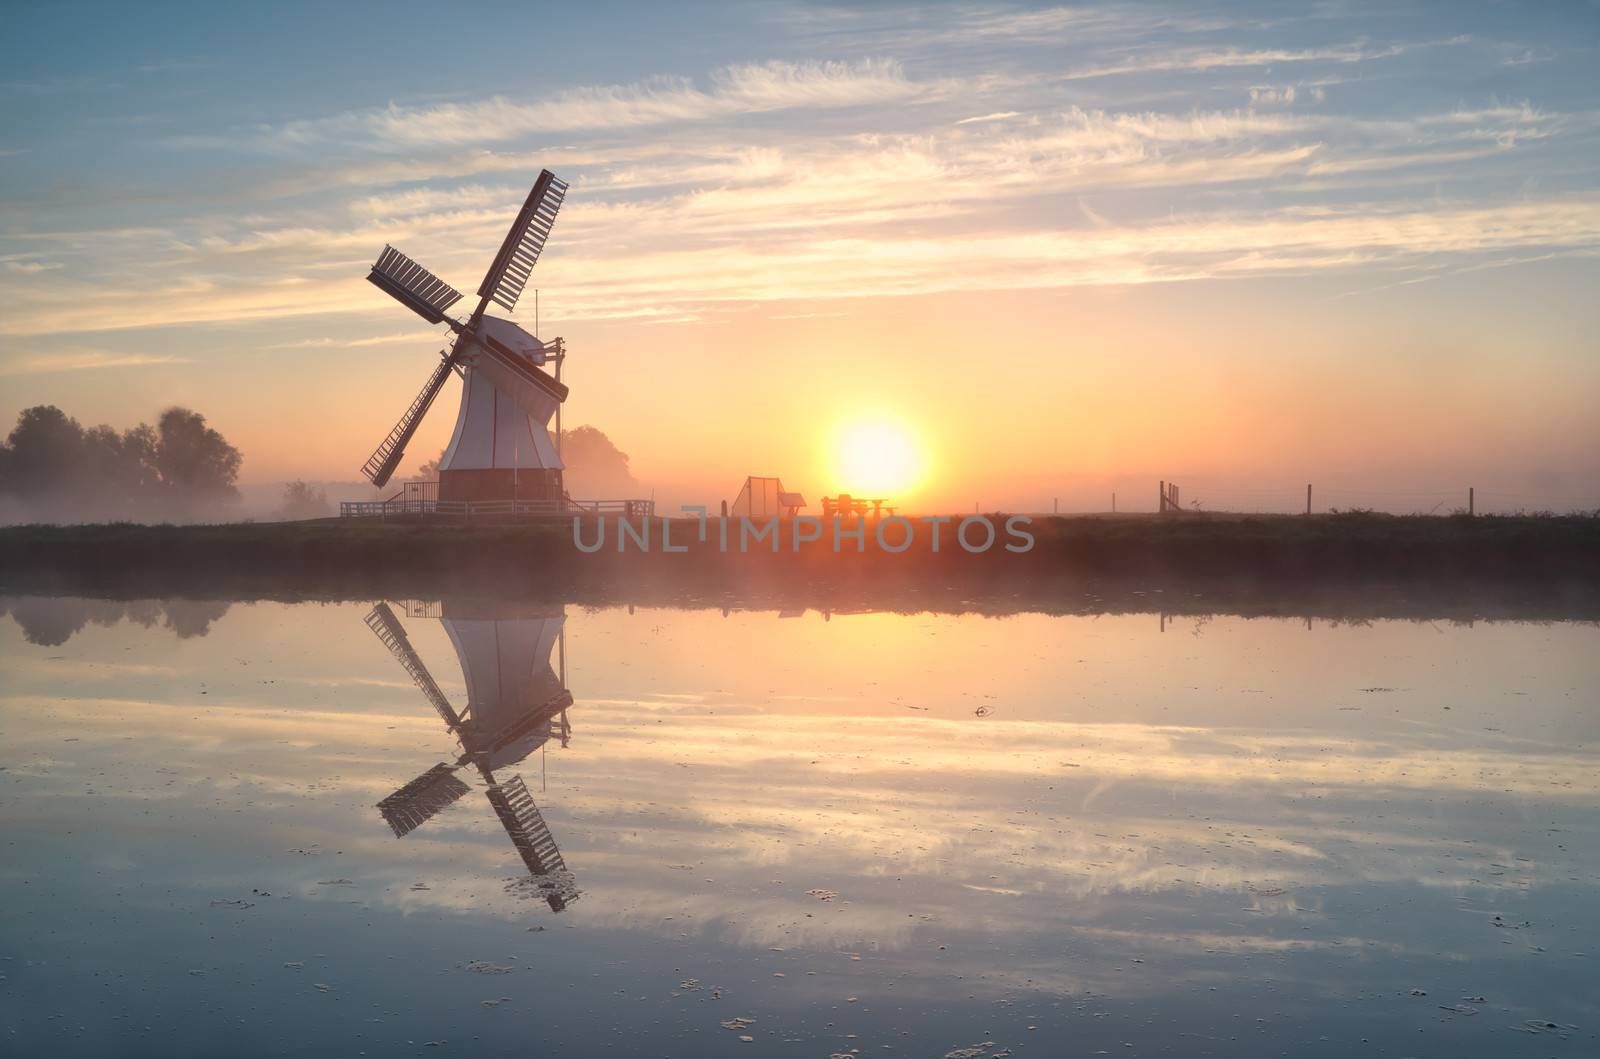 Dutch windmill reflected in river at sunrise, Groningen, Netherlands